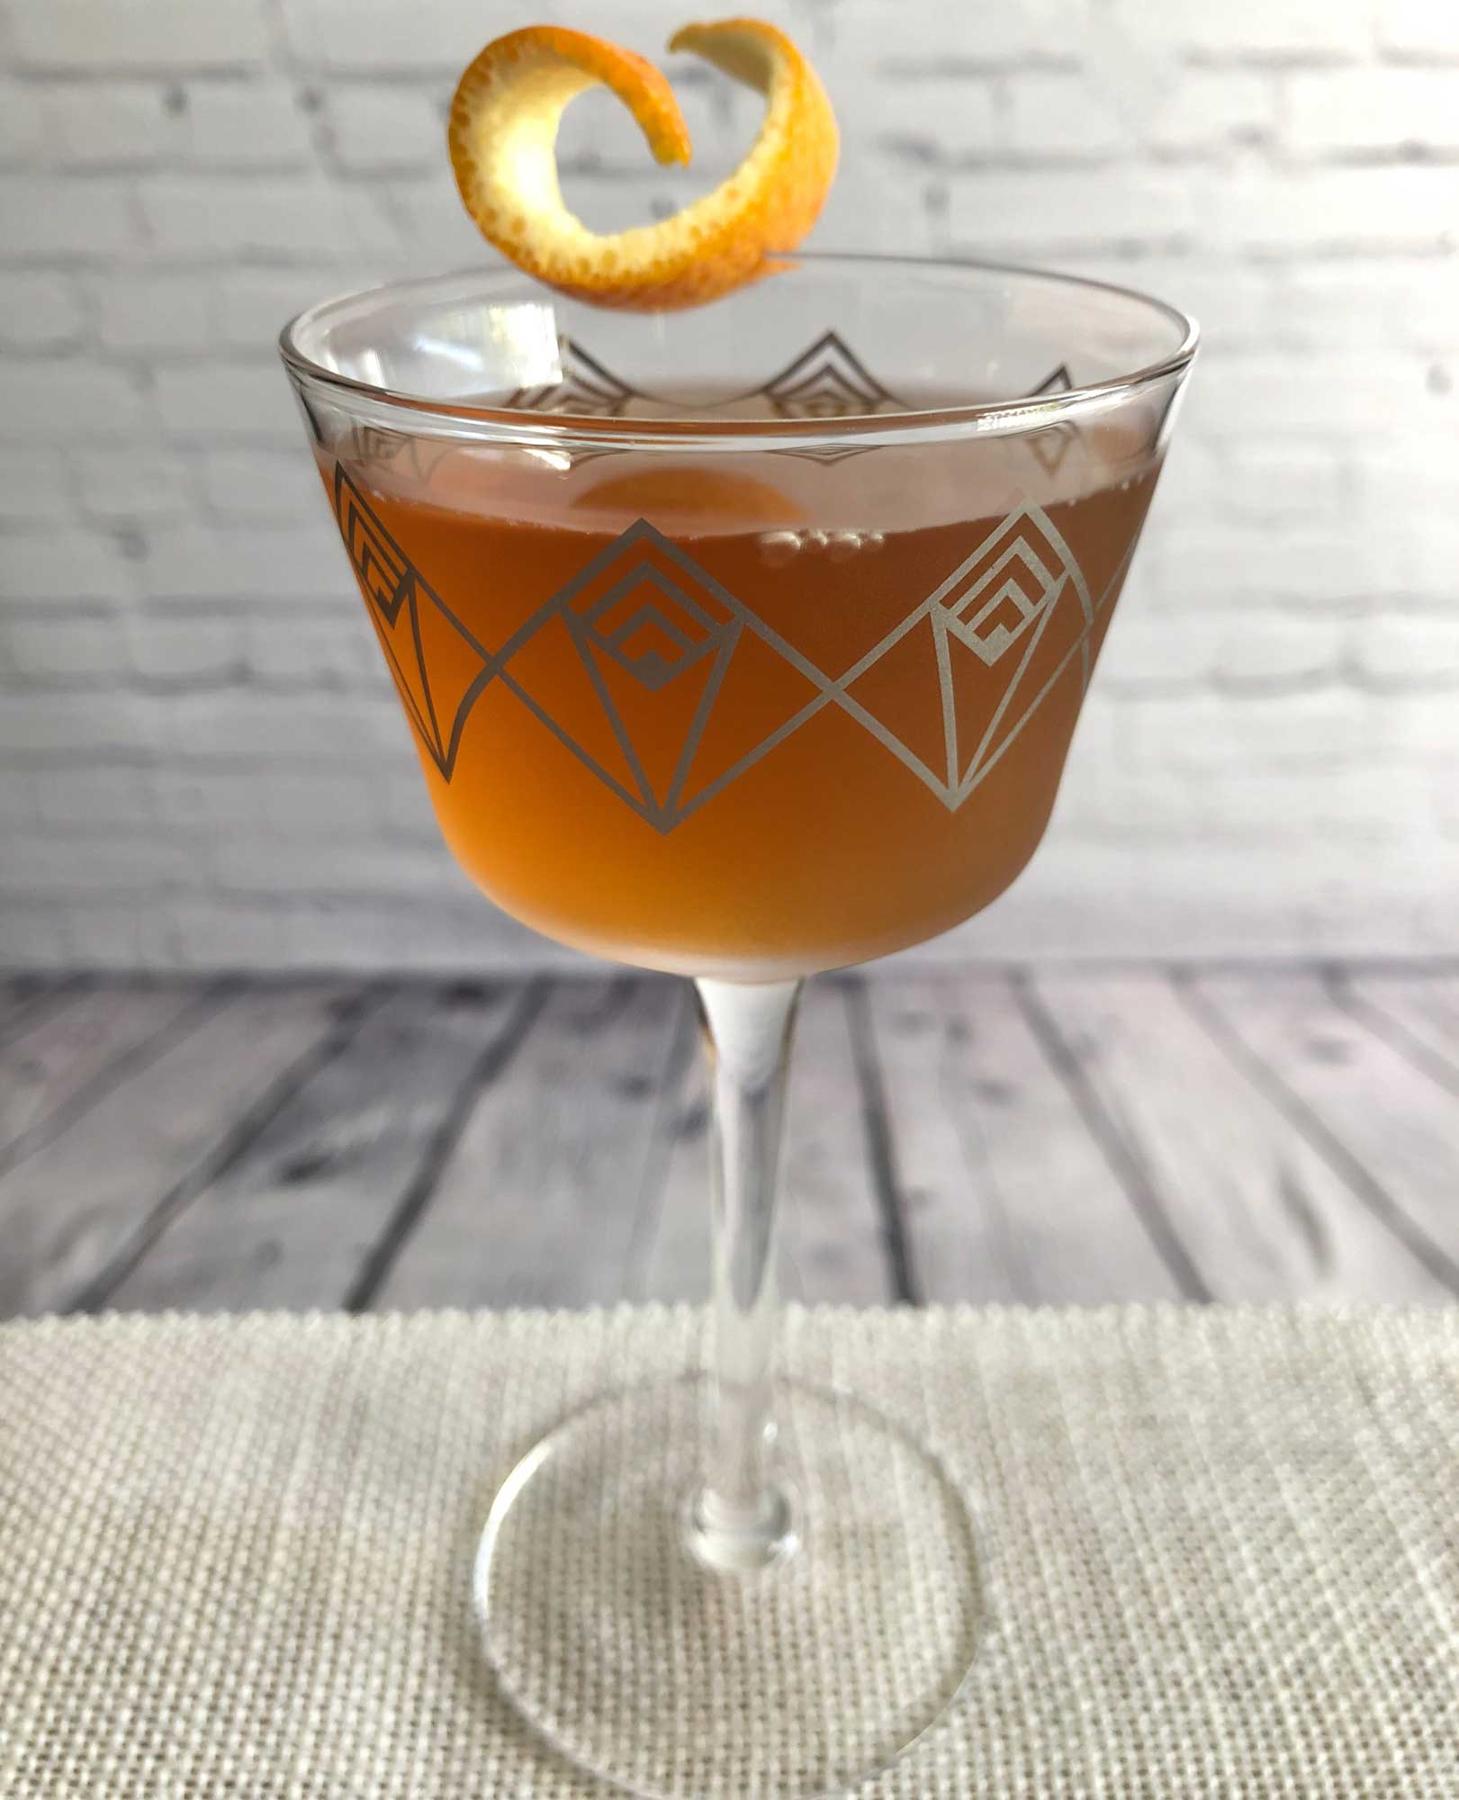 An example of the Autumn Sunset, the mixed drink (drink), by “Sanctuaria: The Dive Bar of Cocktail Bars”, featuring bourbon whiskey, Cocchi Vermouth di Torino ‘Storico’, Dolin Dry Vermouth de Chambéry, St. Elizabeth Allspice Dram, Bénédictine, and orange twist; photo by Lee Edwards